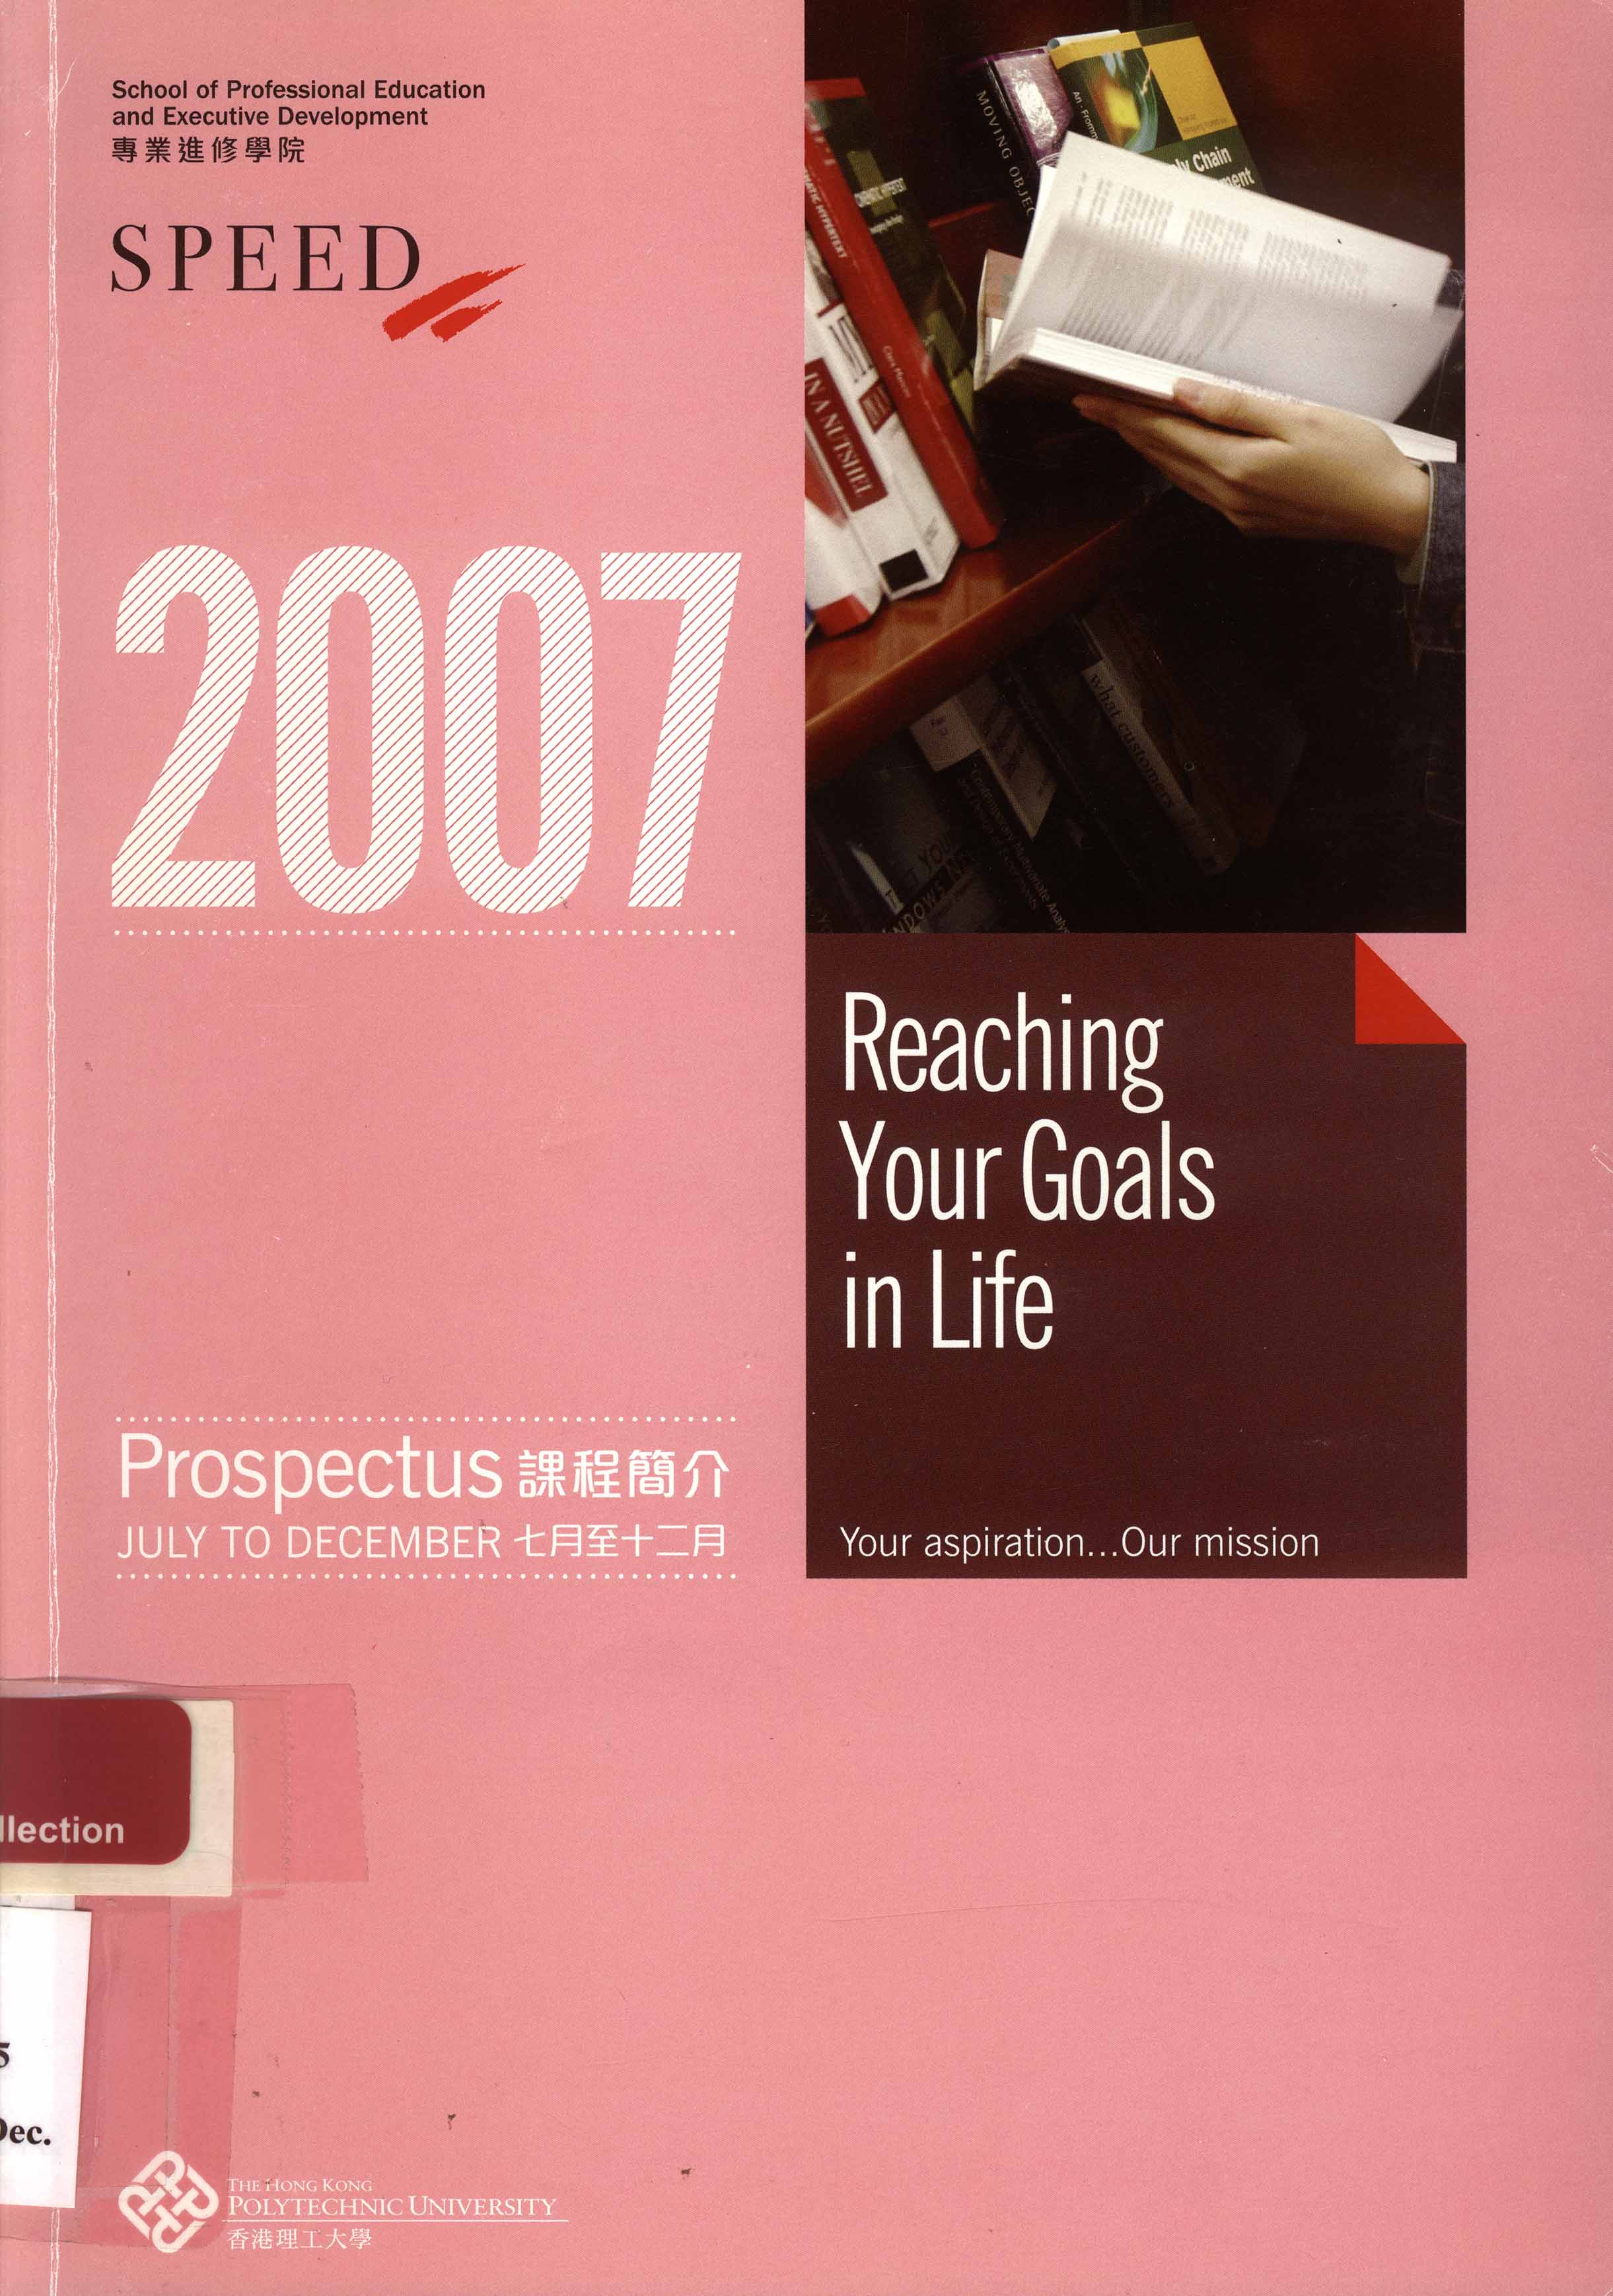 Prospectus [School of Professional Education and Executive Development (SPEED) - July-December 2007]